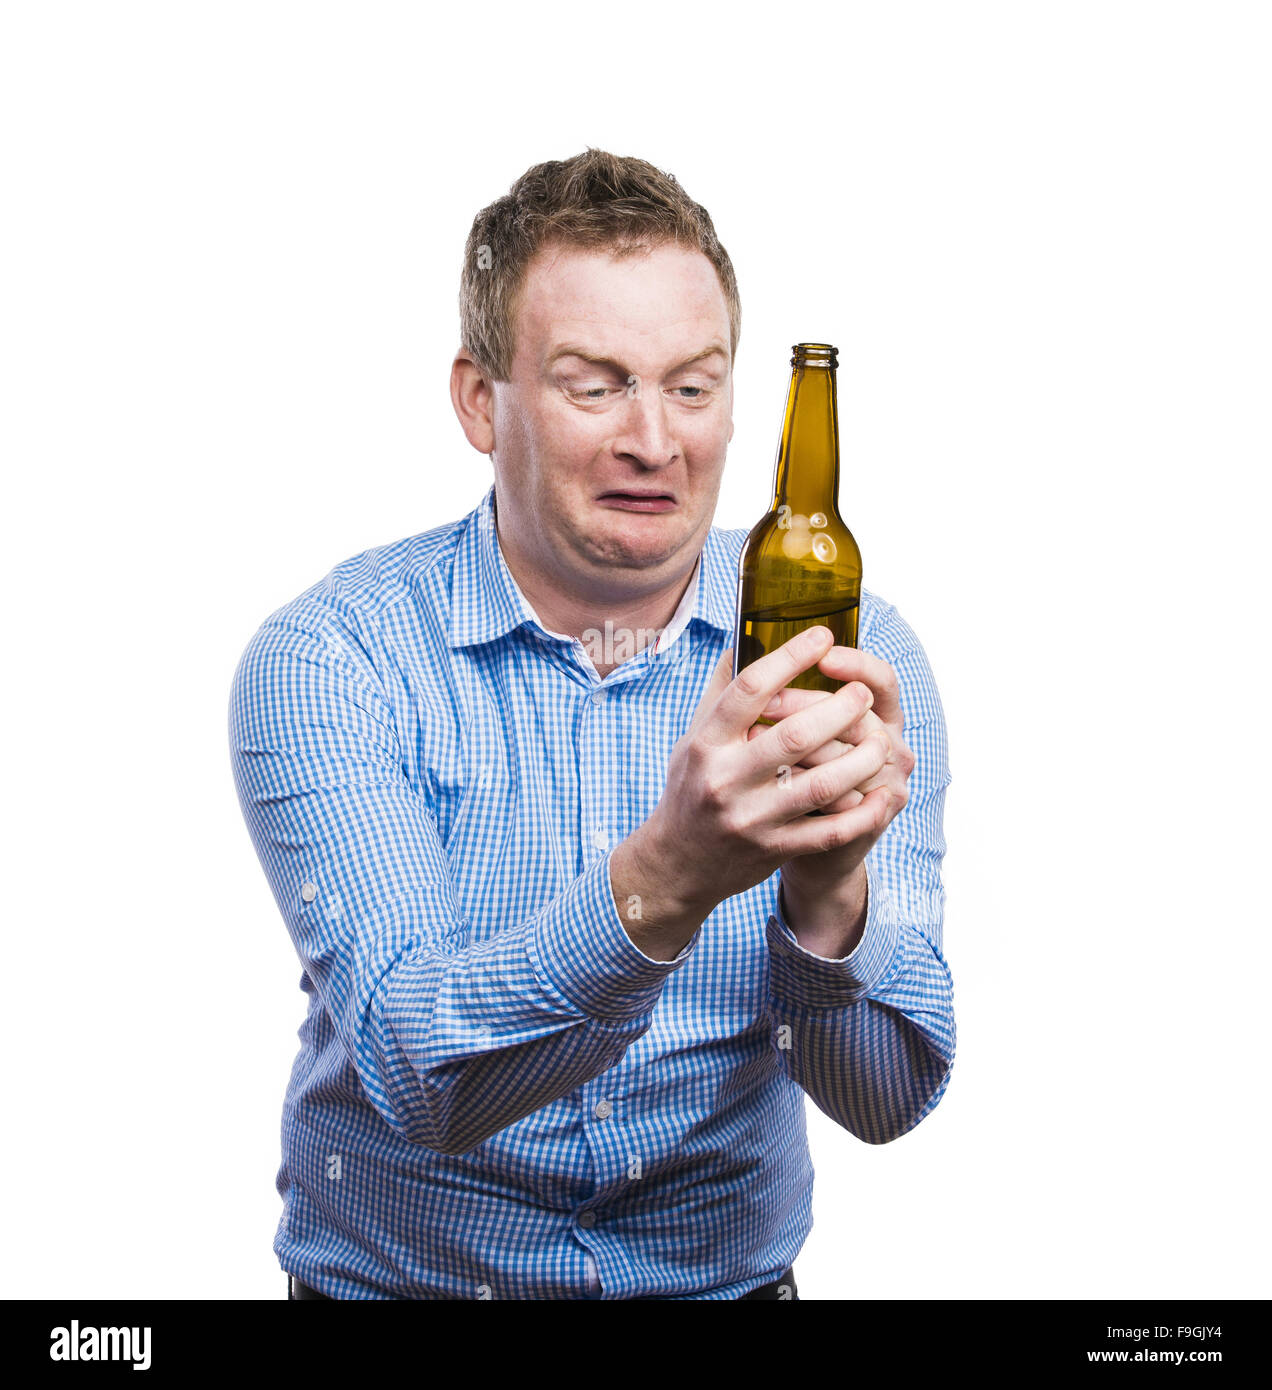 Funny young drunk man holding a beer bottle. Studio shot on white background. Stock Photo